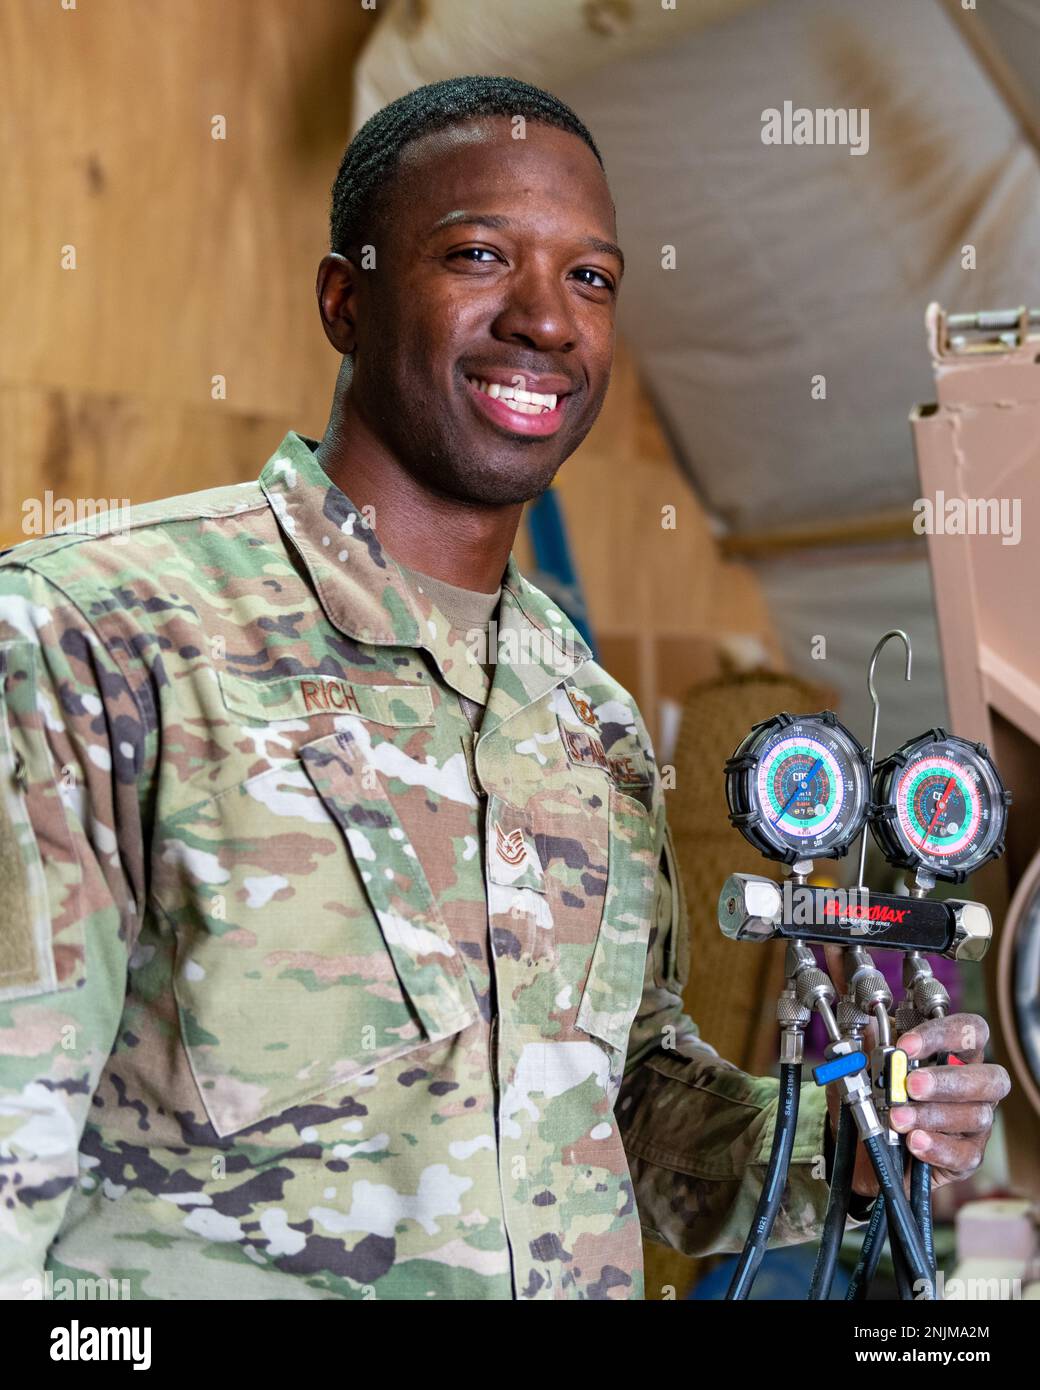 U.S. Air Force Tech. Sgt. Lawton Rich, a heating, ventilation, and air conditioning craftsman with the 378th Expeditionary Civil Engineer Squadron, poses with an HVAC unit pressure tester at Prince Sultan Air Base, Kingdom of Saudi Arabia, Aug. 9, 2022. Rich won the month of July’s Unsung Hero award, presented by the PSAB Top 3 Association, which recognizes up-and-coming leaders within the ranks of E5 and E6 who exemplify their service’s core values, inspire others and contribute to the improvement of customer service and the overall mission. Stock Photo